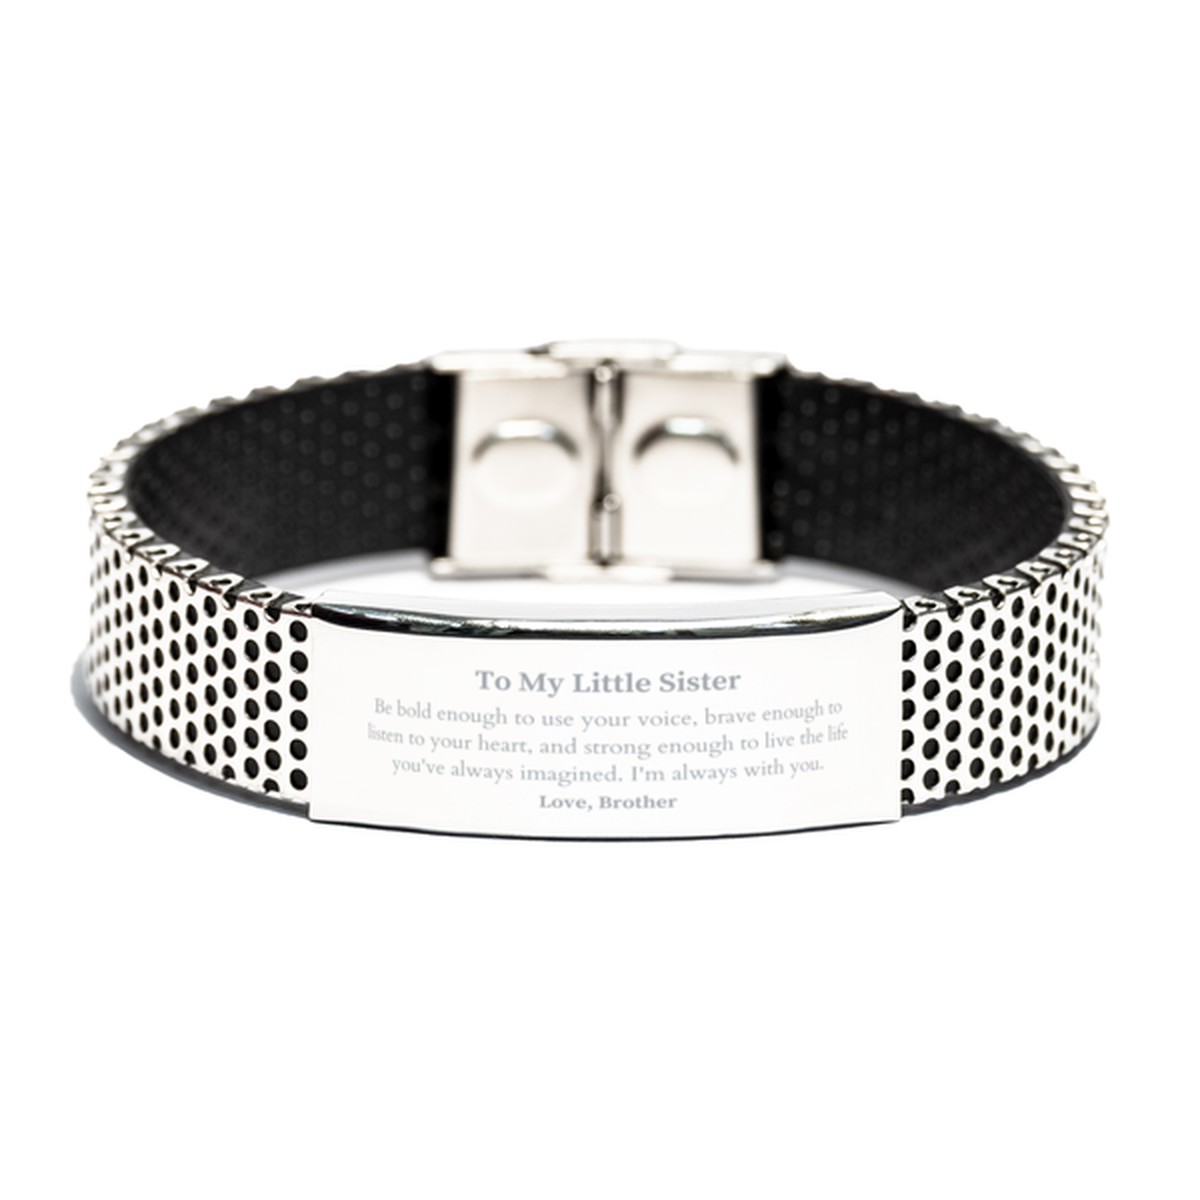 Keepsake Little Sister Stainless Steel Bracelet Gift Idea Graduation Christmas Birthday Little Sister from Brother, Little Sister Be bold enough to use your voice, brave enough to listen to your heart. Love, Brother